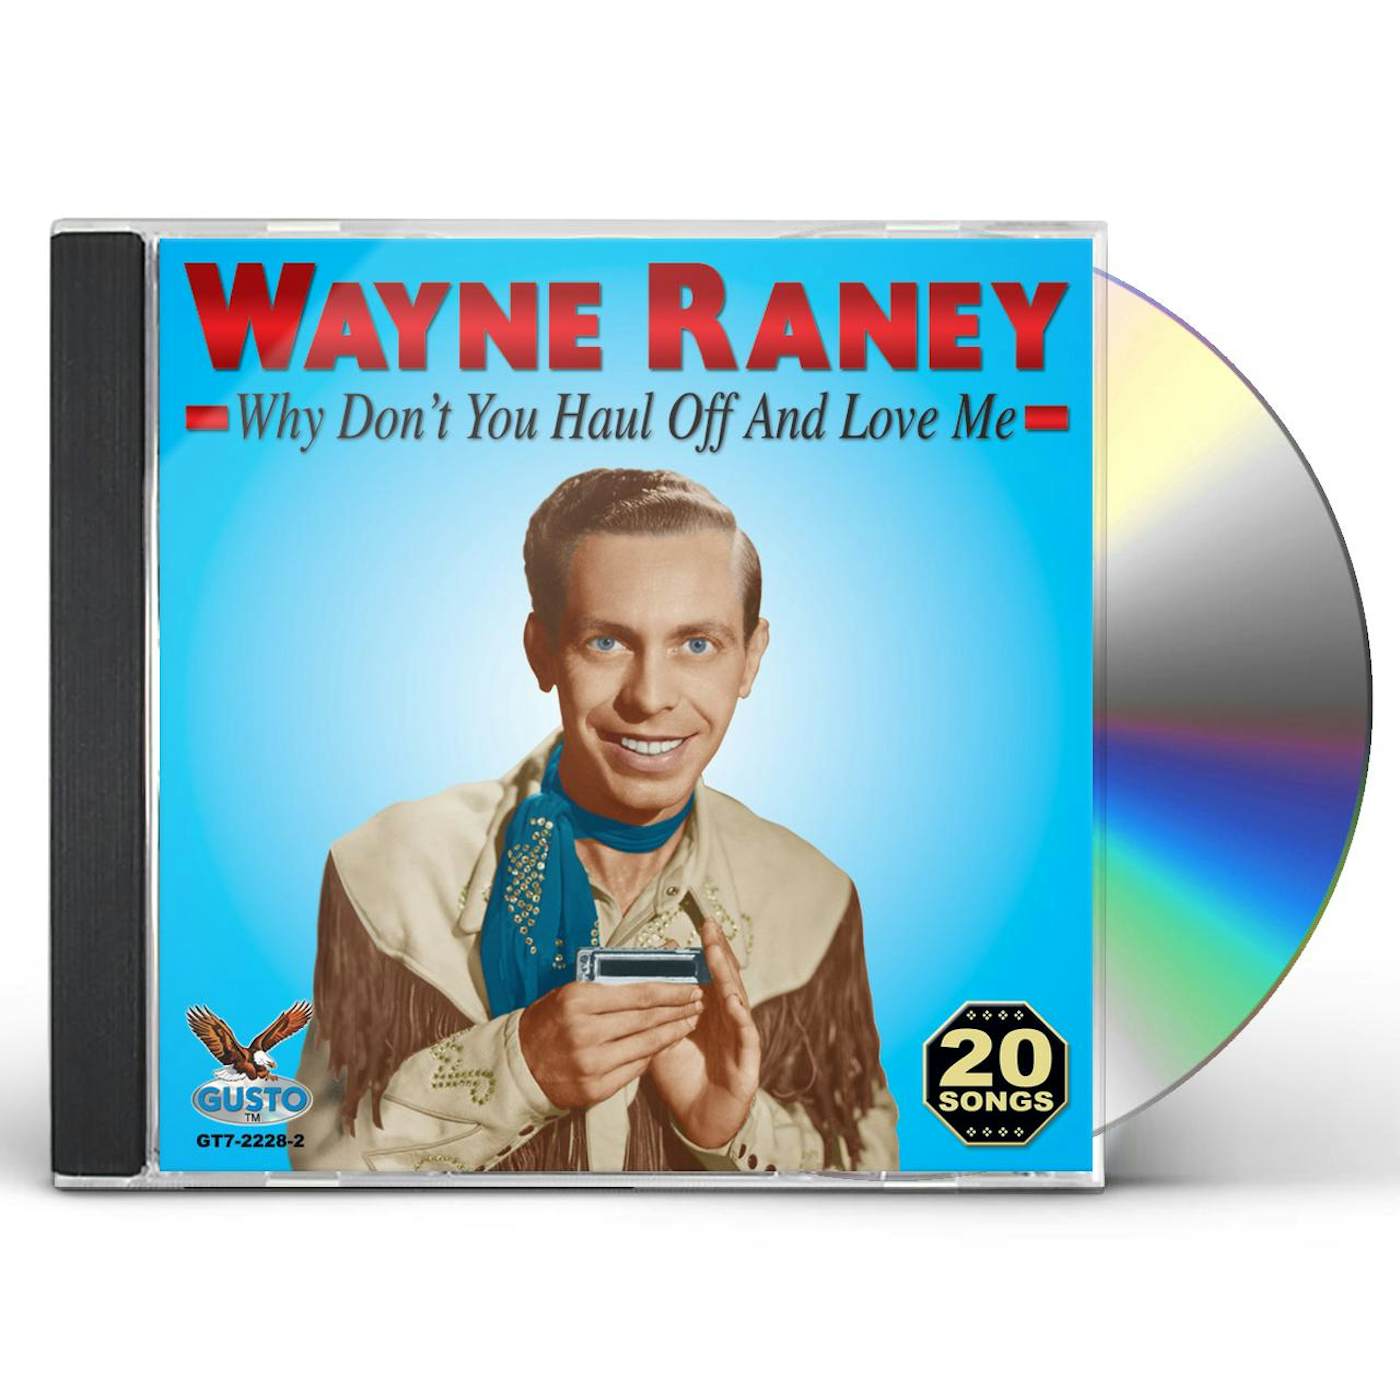 Wayne Raney WHY DON'T YOU HAUL OFF & LOVE ME CD